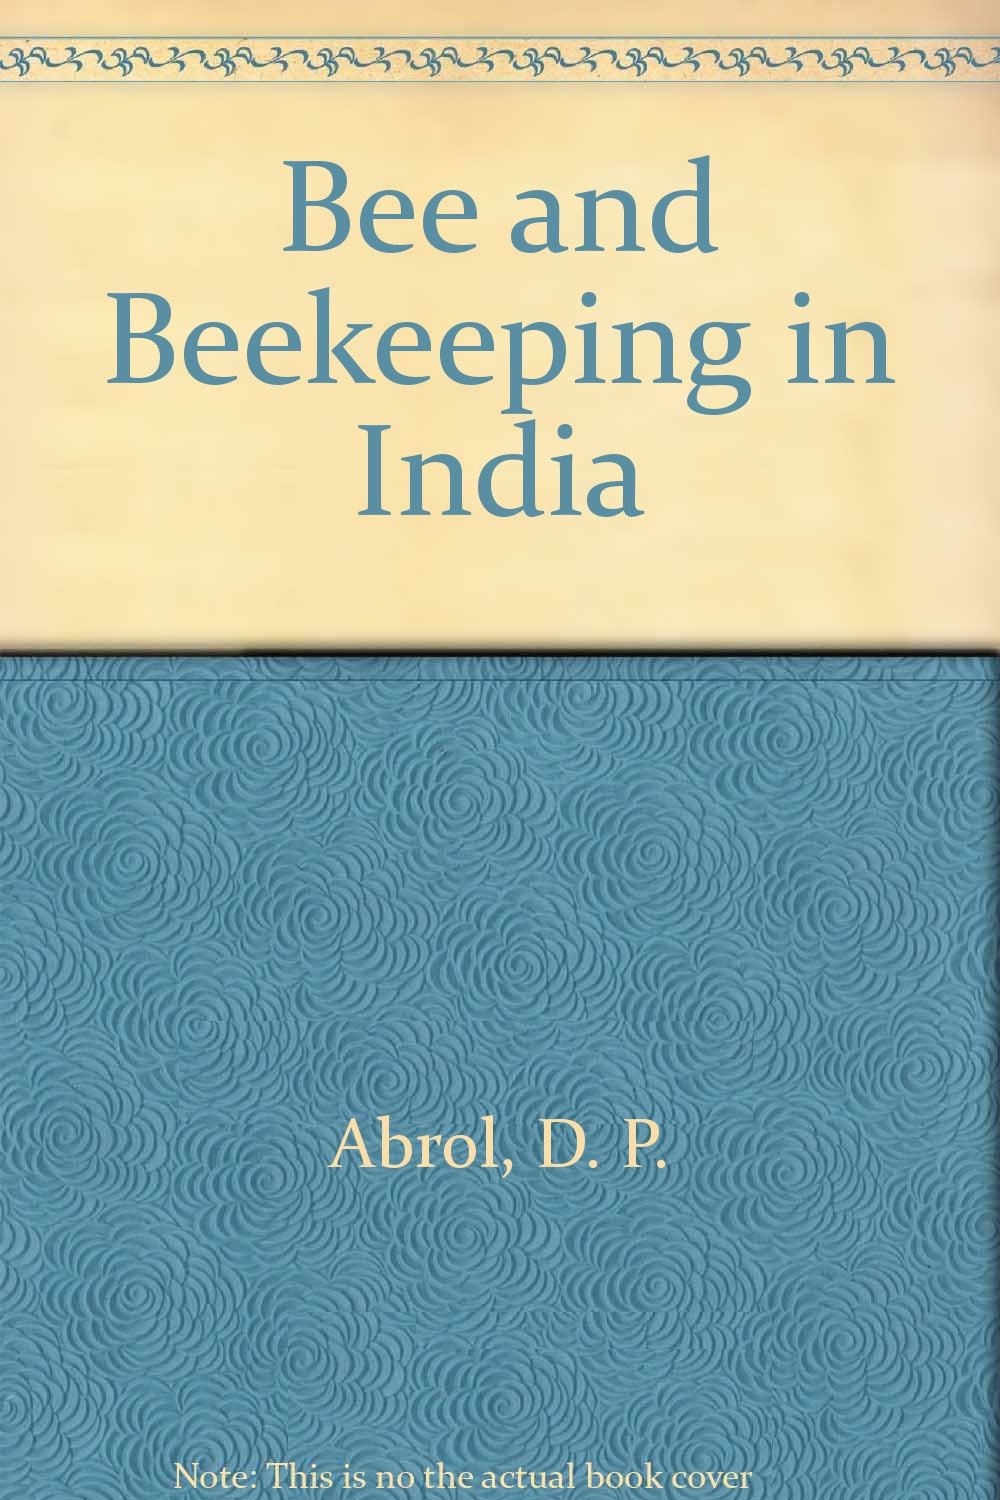 Bees and Bee Keeping in India